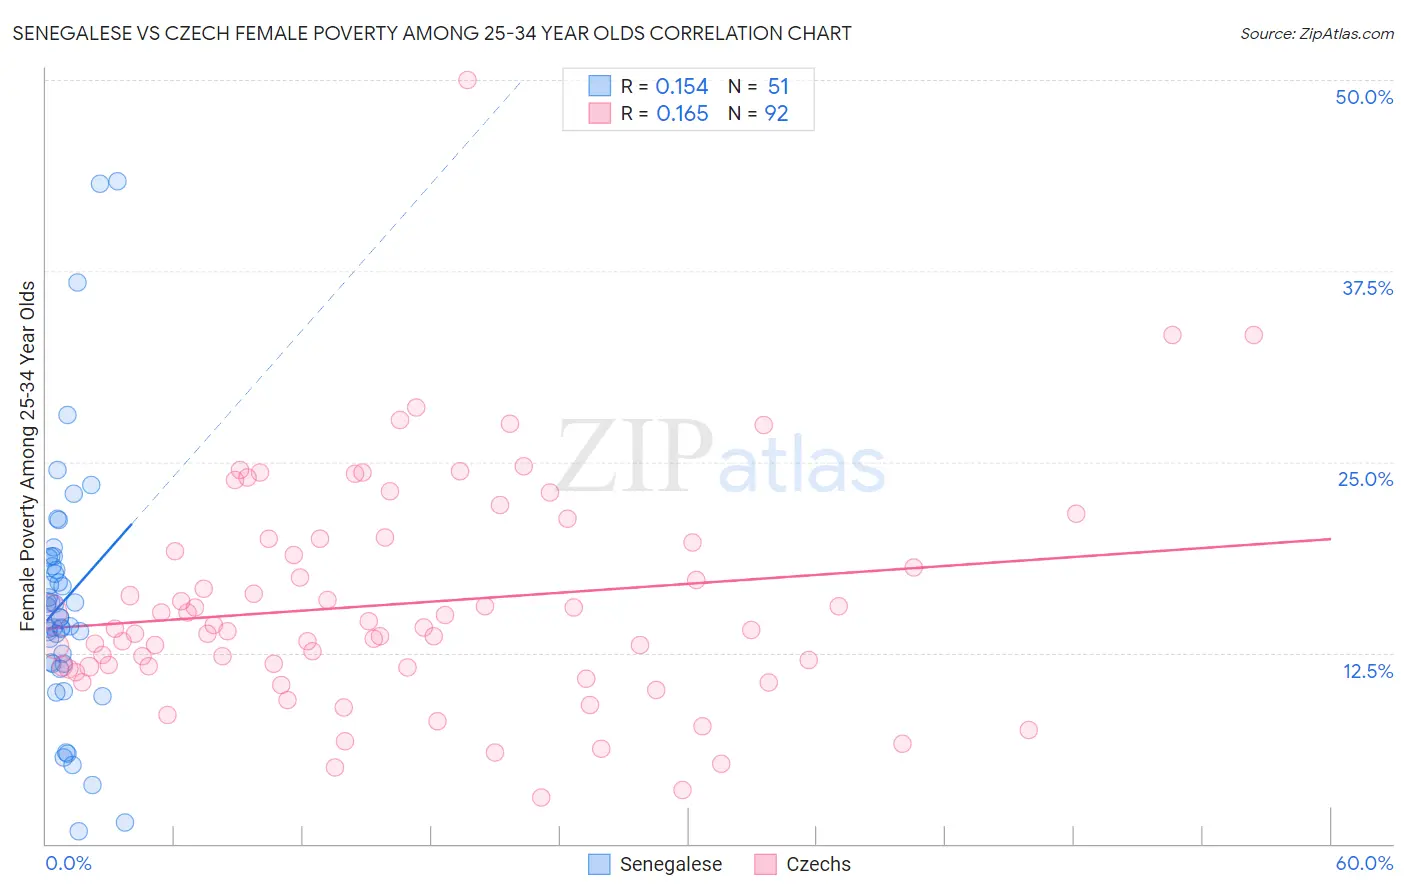 Senegalese vs Czech Female Poverty Among 25-34 Year Olds